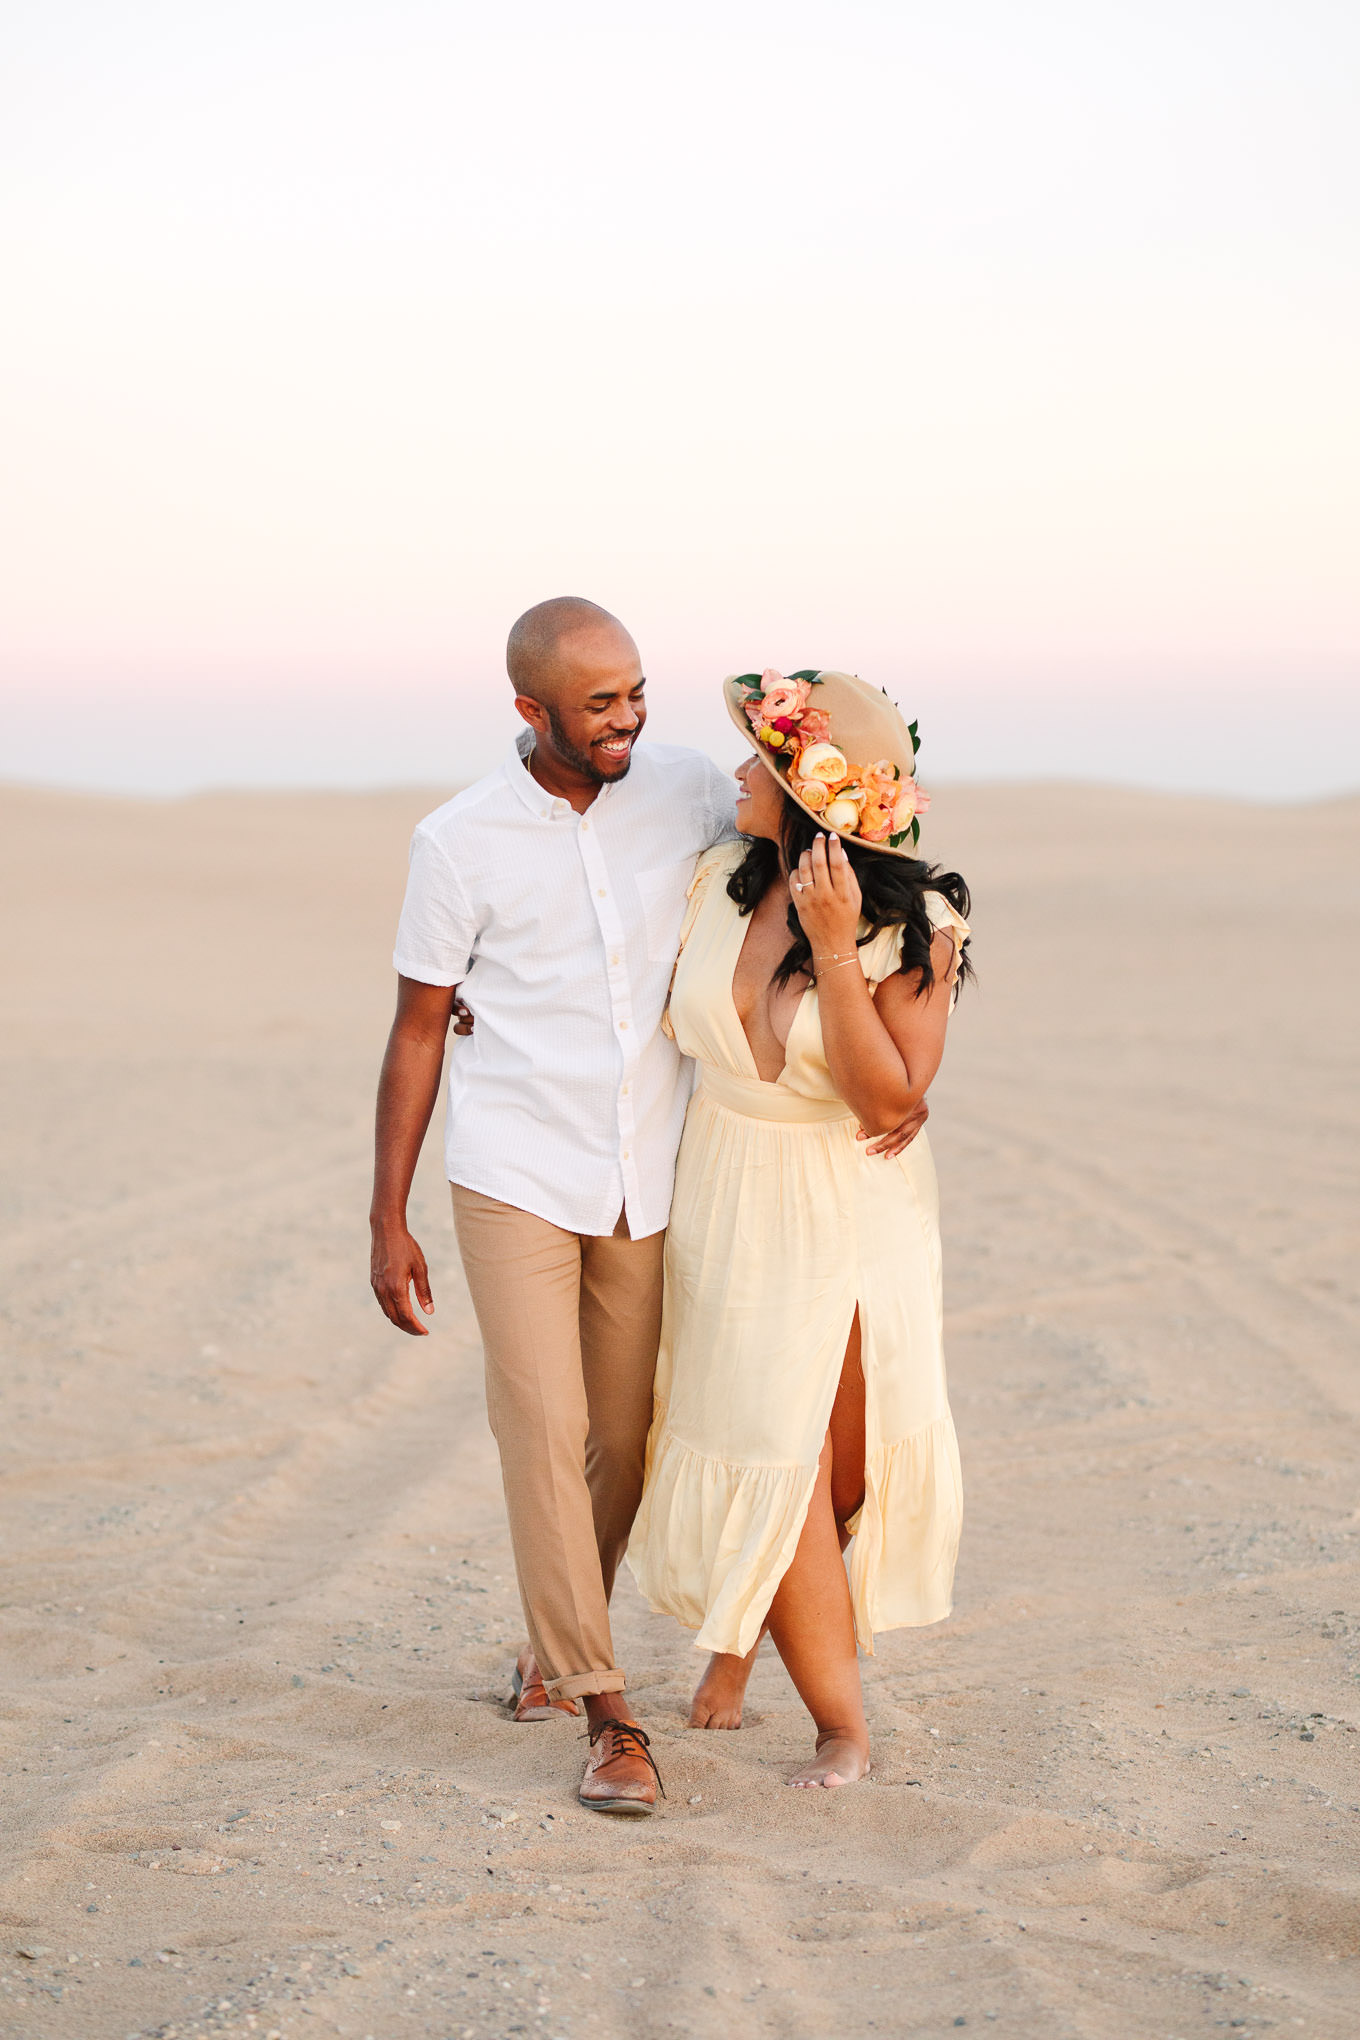 Happy couple walking on sand dune at sunset | California Sand Dunes engagement session | Colorful Palm Springs wedding photography | #palmspringsphotographer #sanddunes #engagementsession #southerncalifornia  Source: Mary Costa Photography | Los Angeles